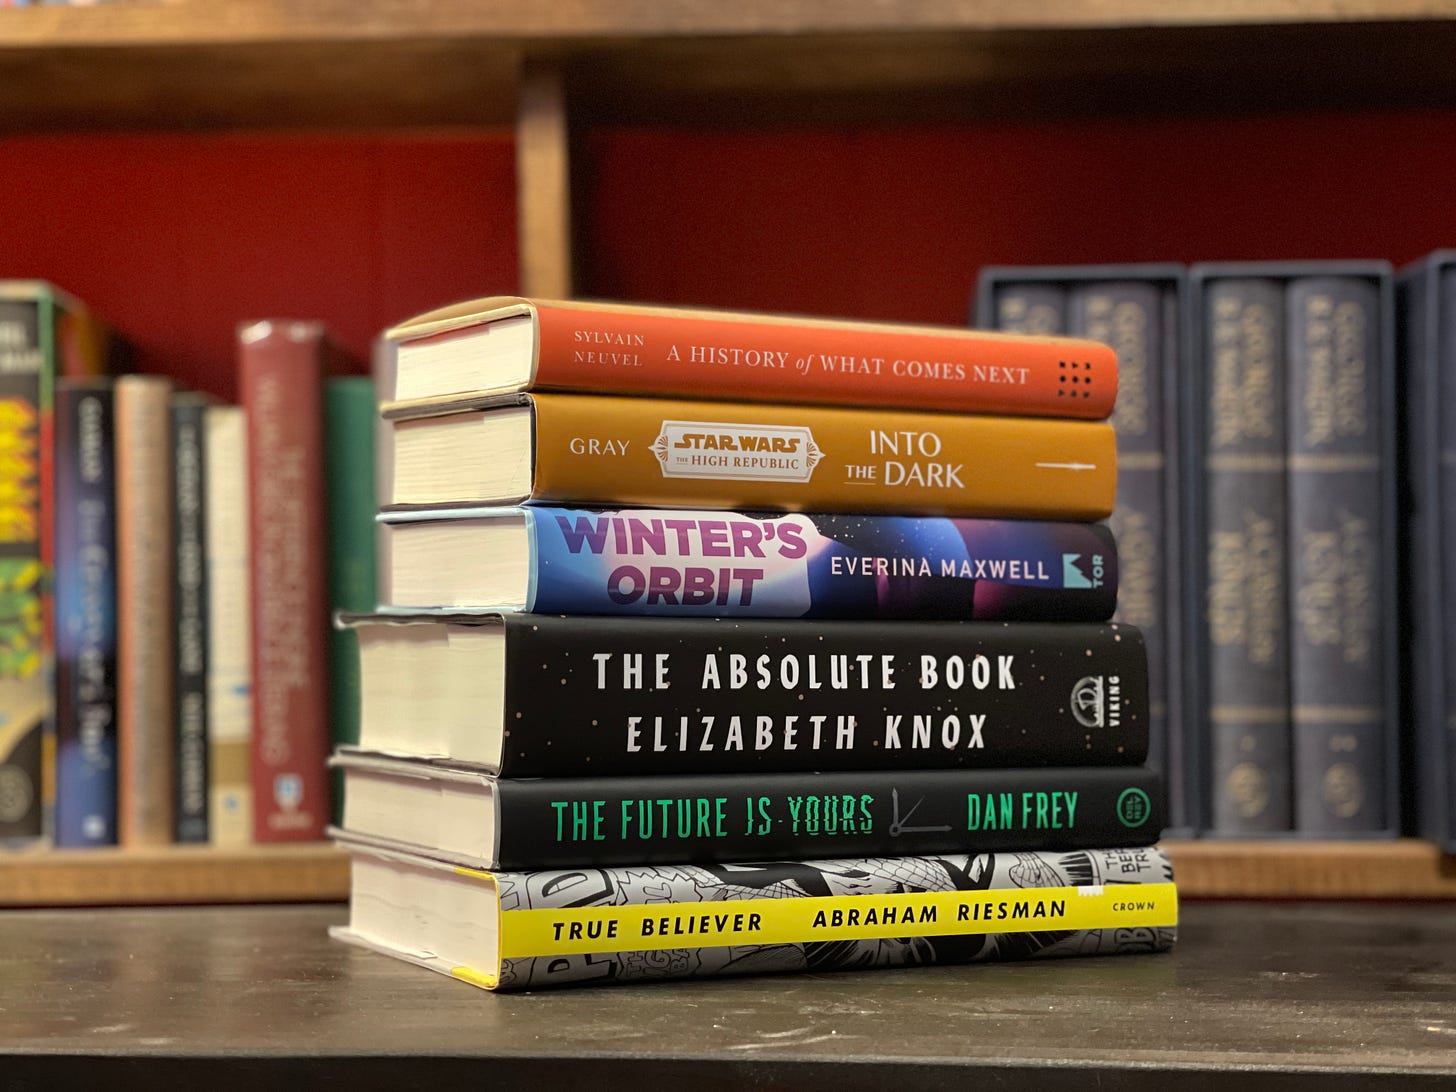 A colorful stack of books sits on a brown table, with a bookshelf in the background.